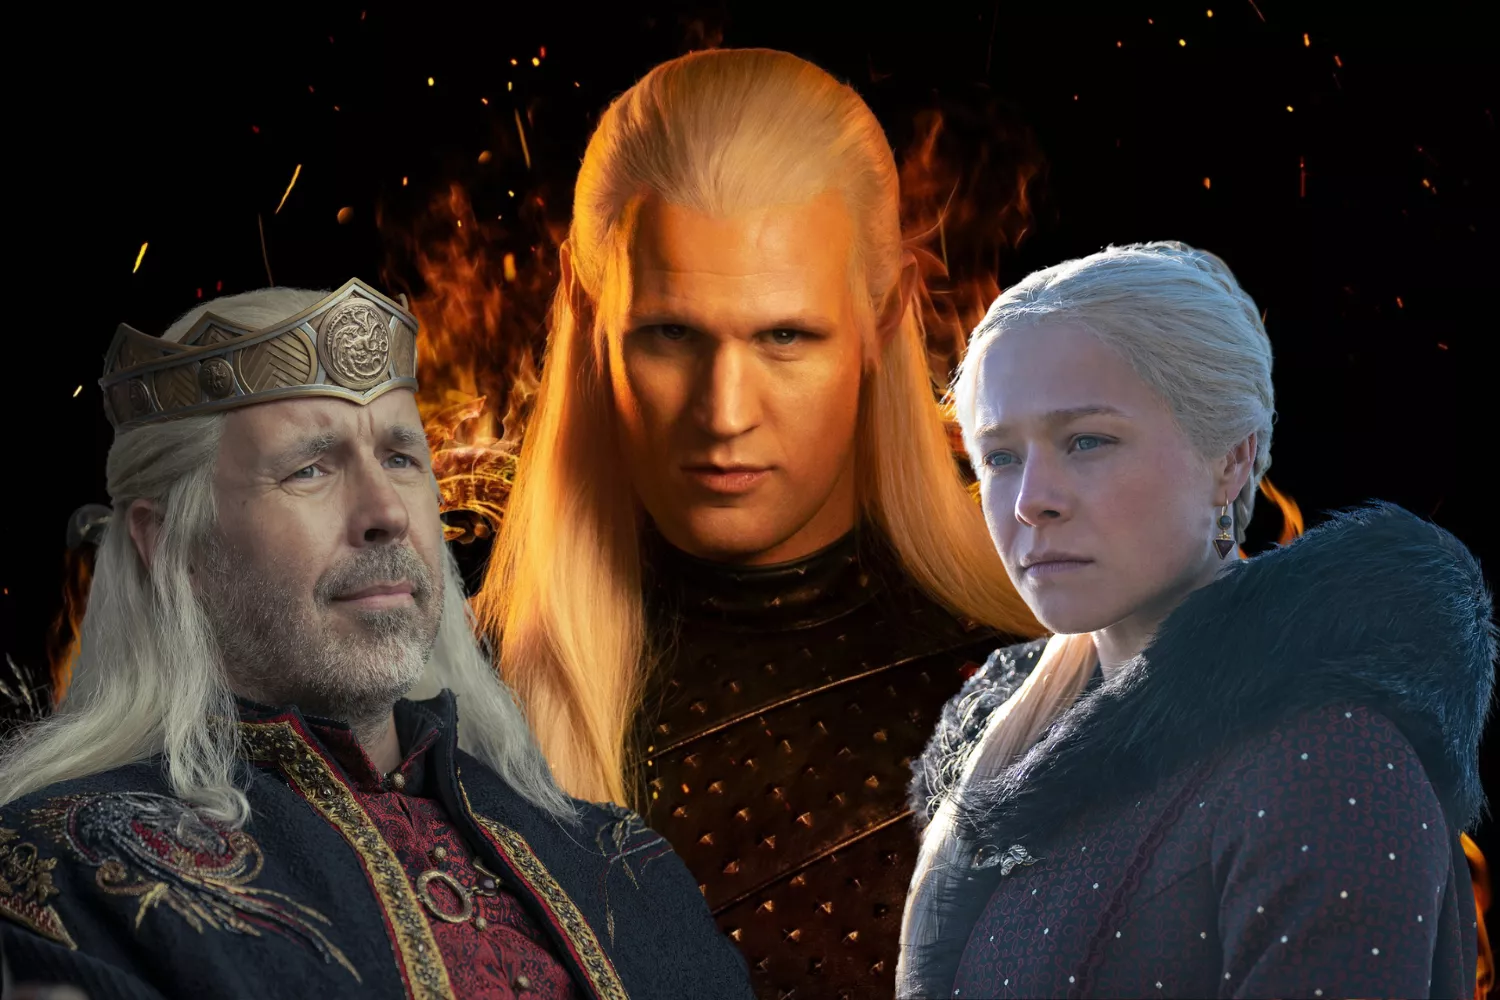 House Of The Dragon: From Rhaenyra & Daemon To Daenerys & Jon, Here's How  The HOTD Characters Are Related To Game Of Thrones Families!